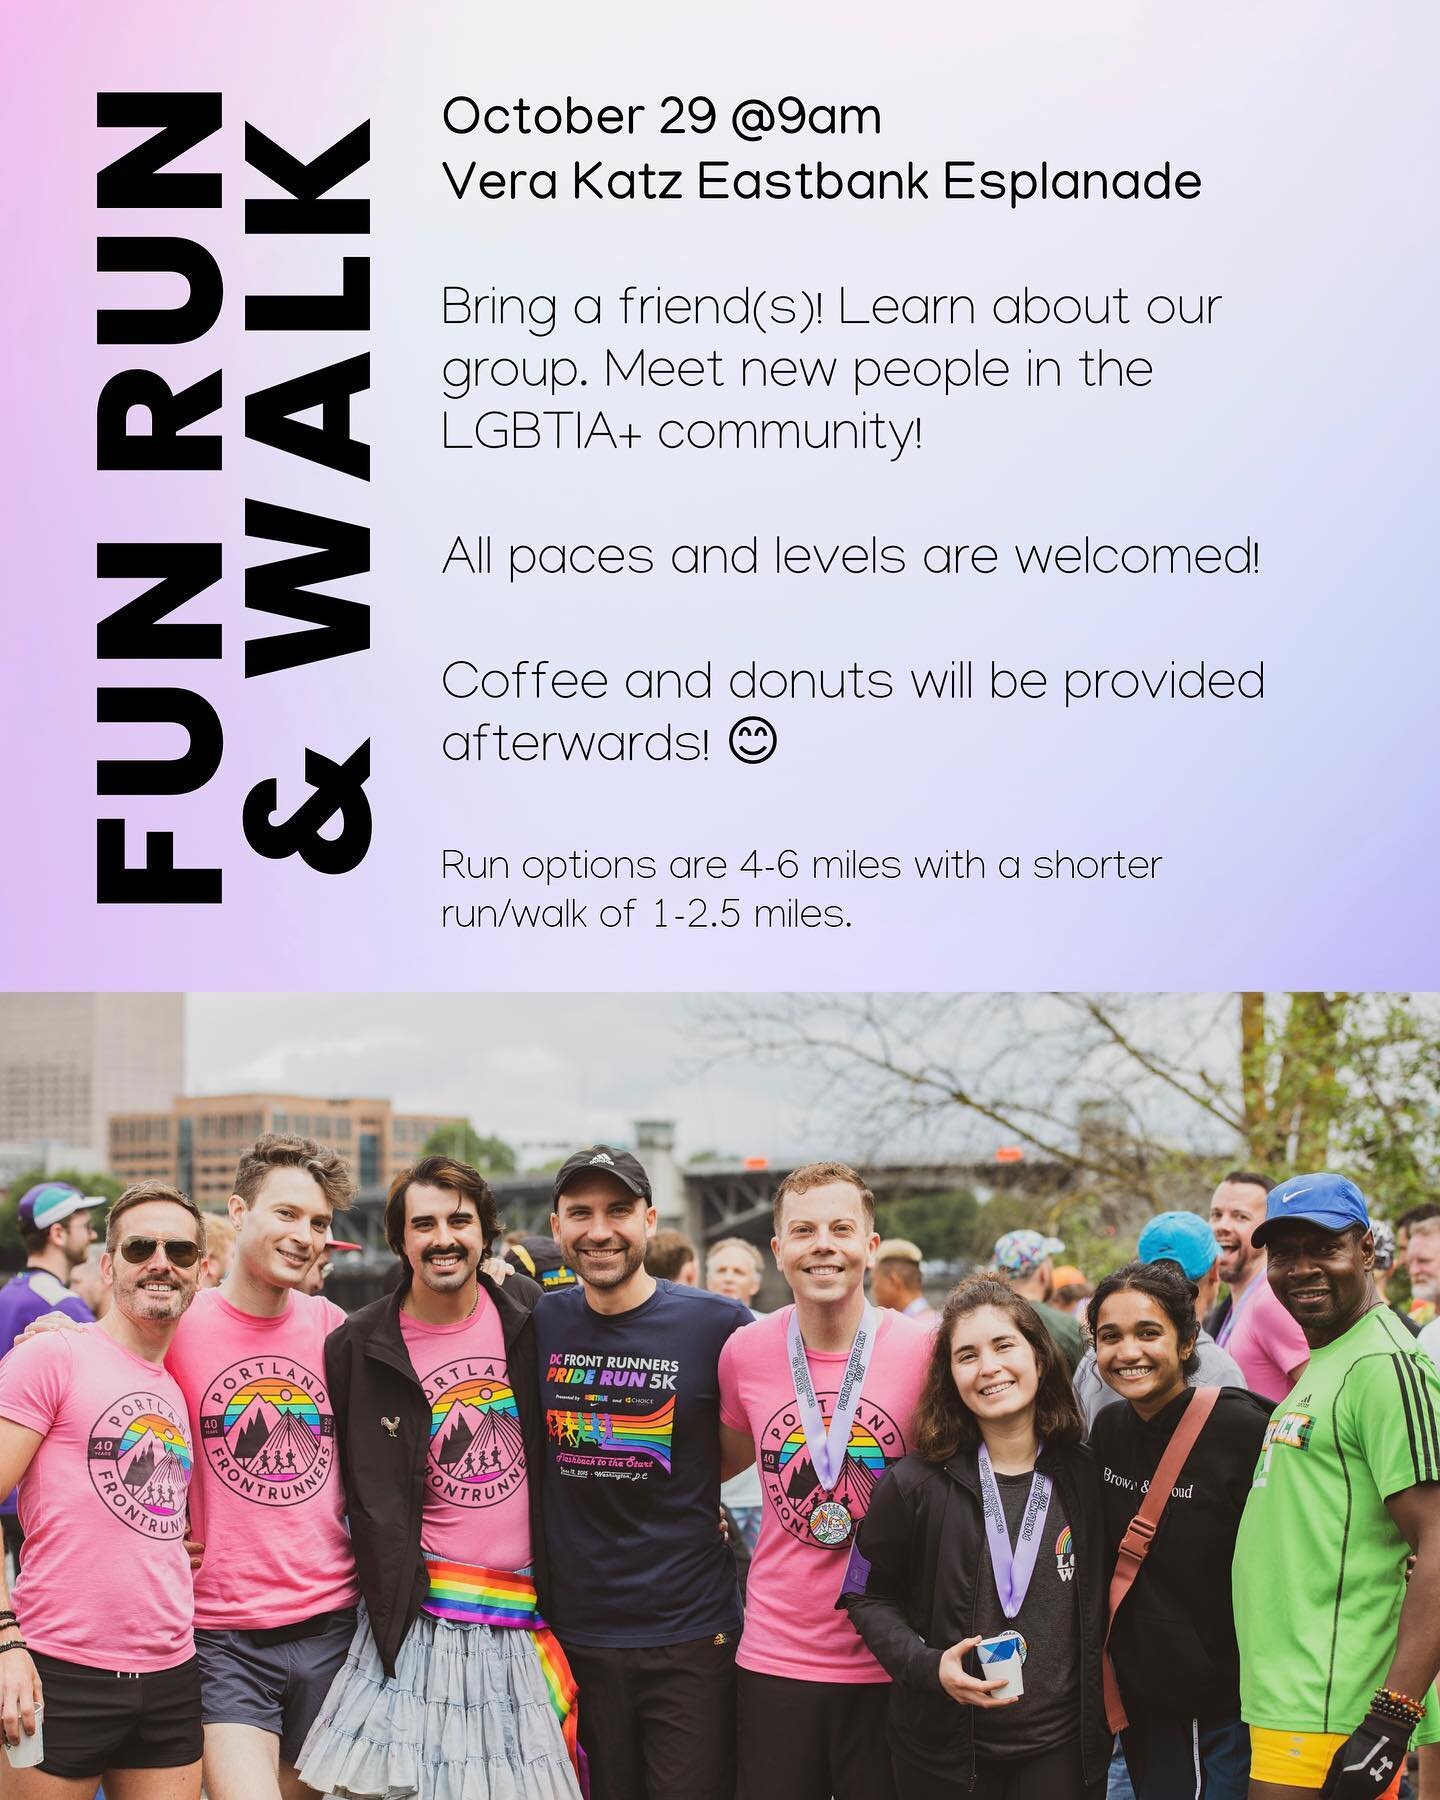 It&rsquo;s back back back again! Join us for our Bring-A-Friend event on Saturday October 29th at 9am! 

Bring a friend(s) to this event where we&rsquo;ll providing a more in-depth overview of the club, the routes, and the events we put on throughout